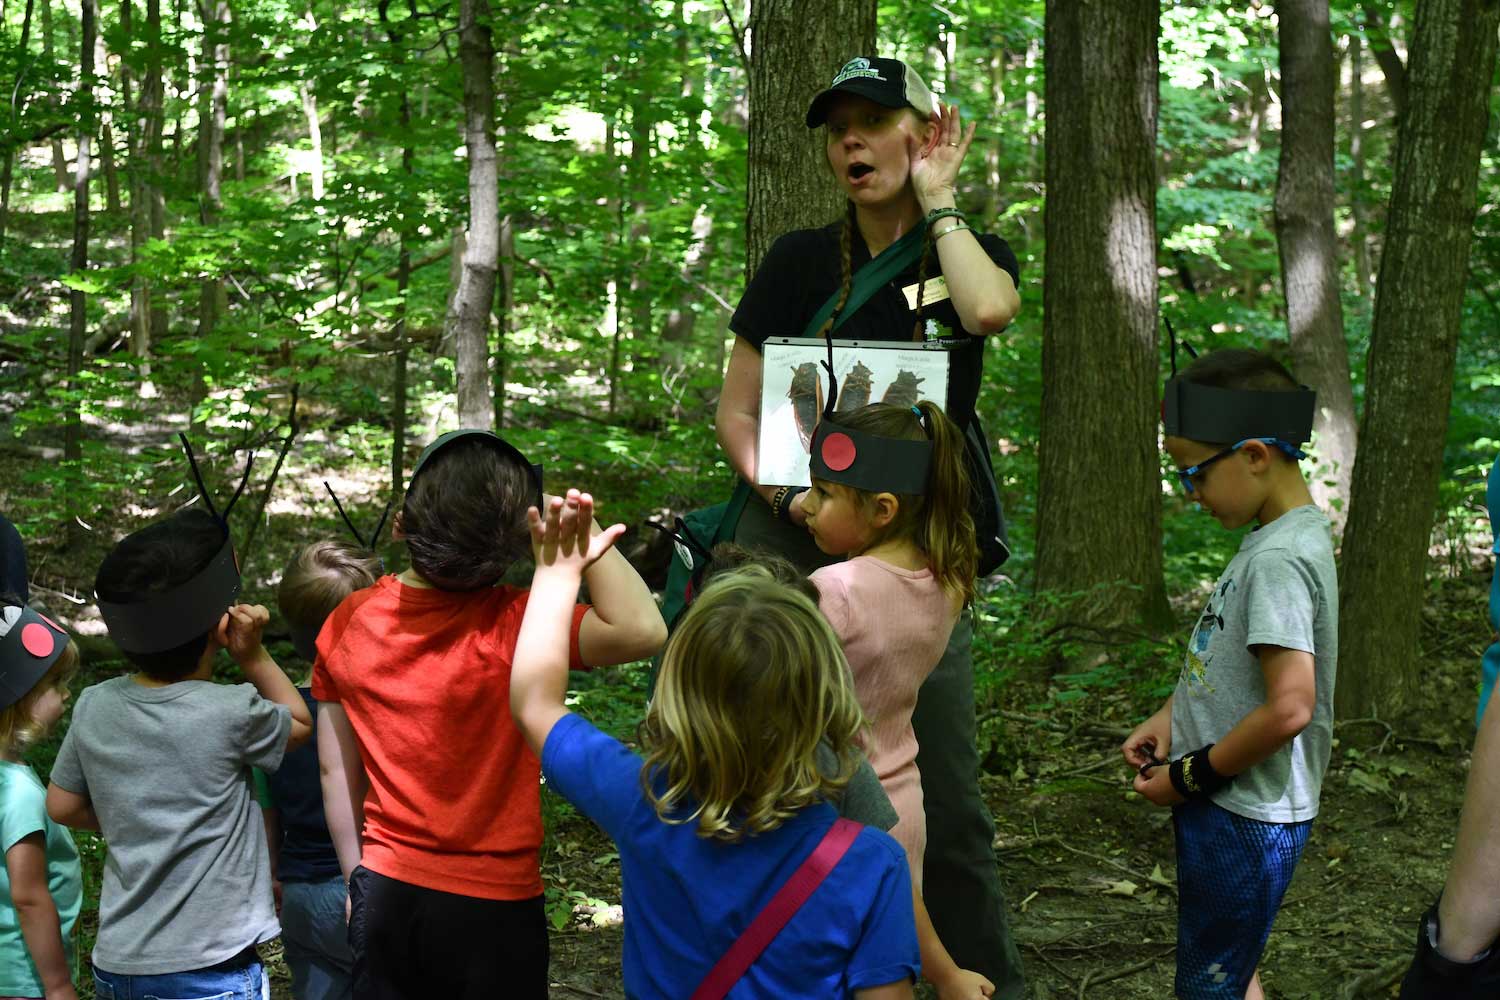 An adult leading a group of young kids on a hike through the forest.